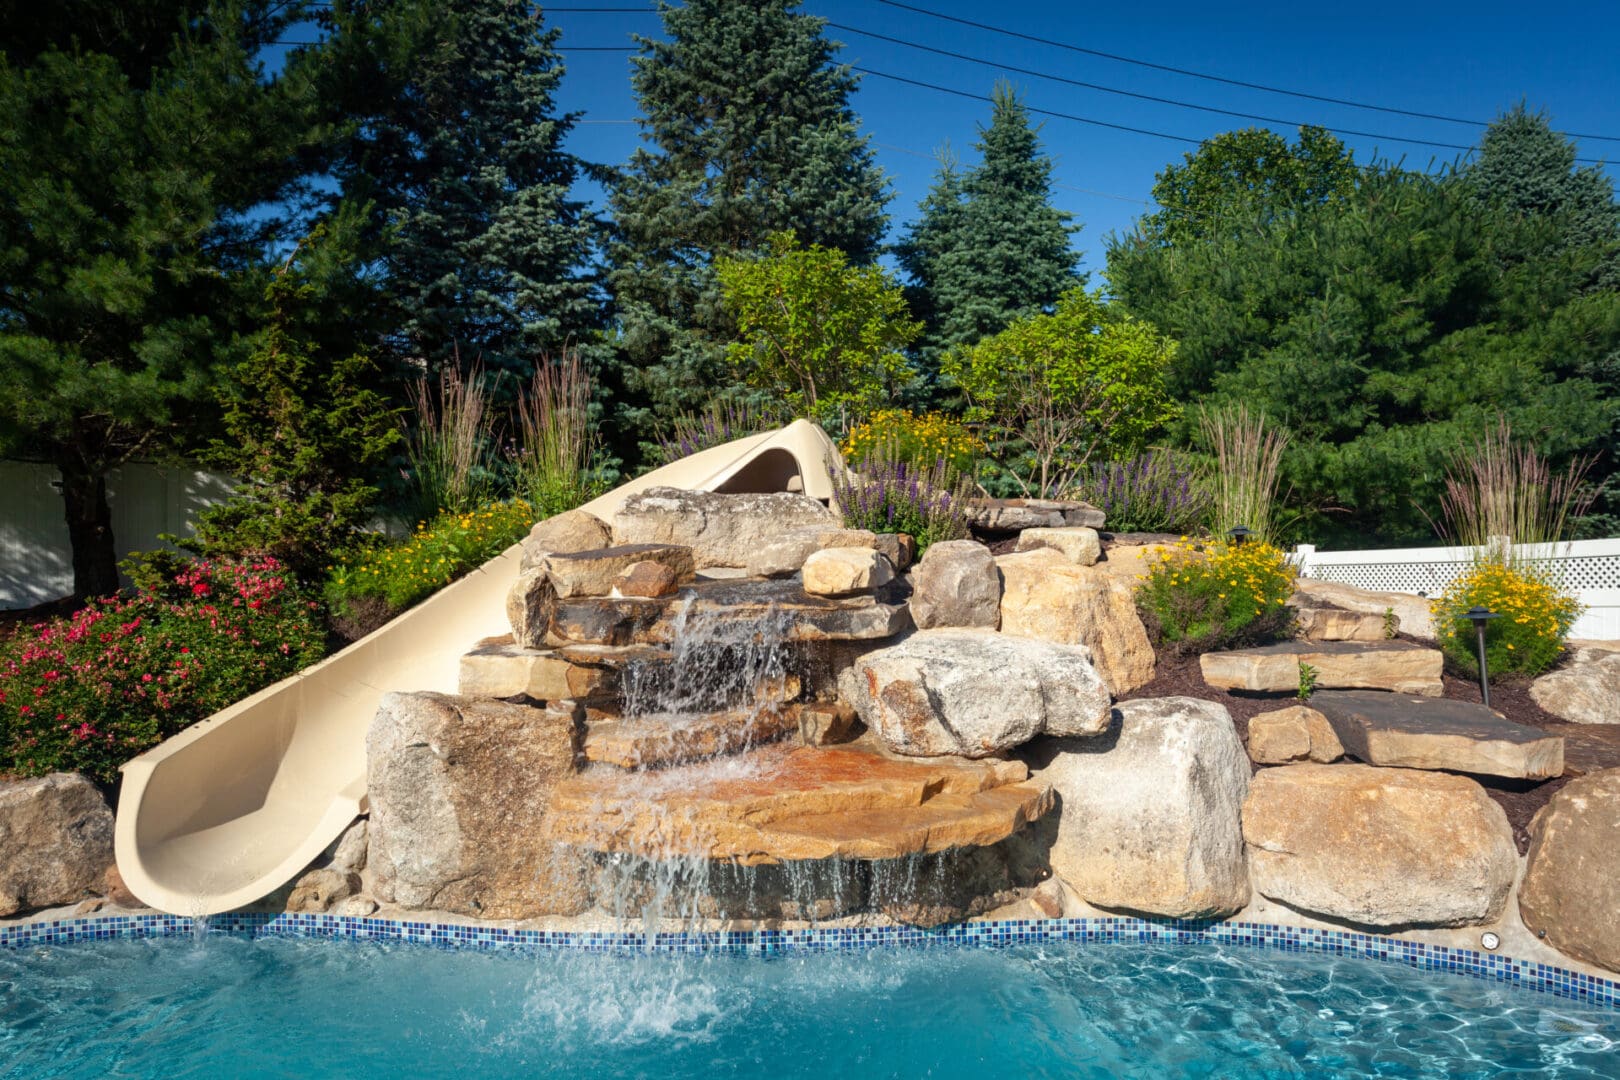 A pool with water features such as a slide and a waterfall.